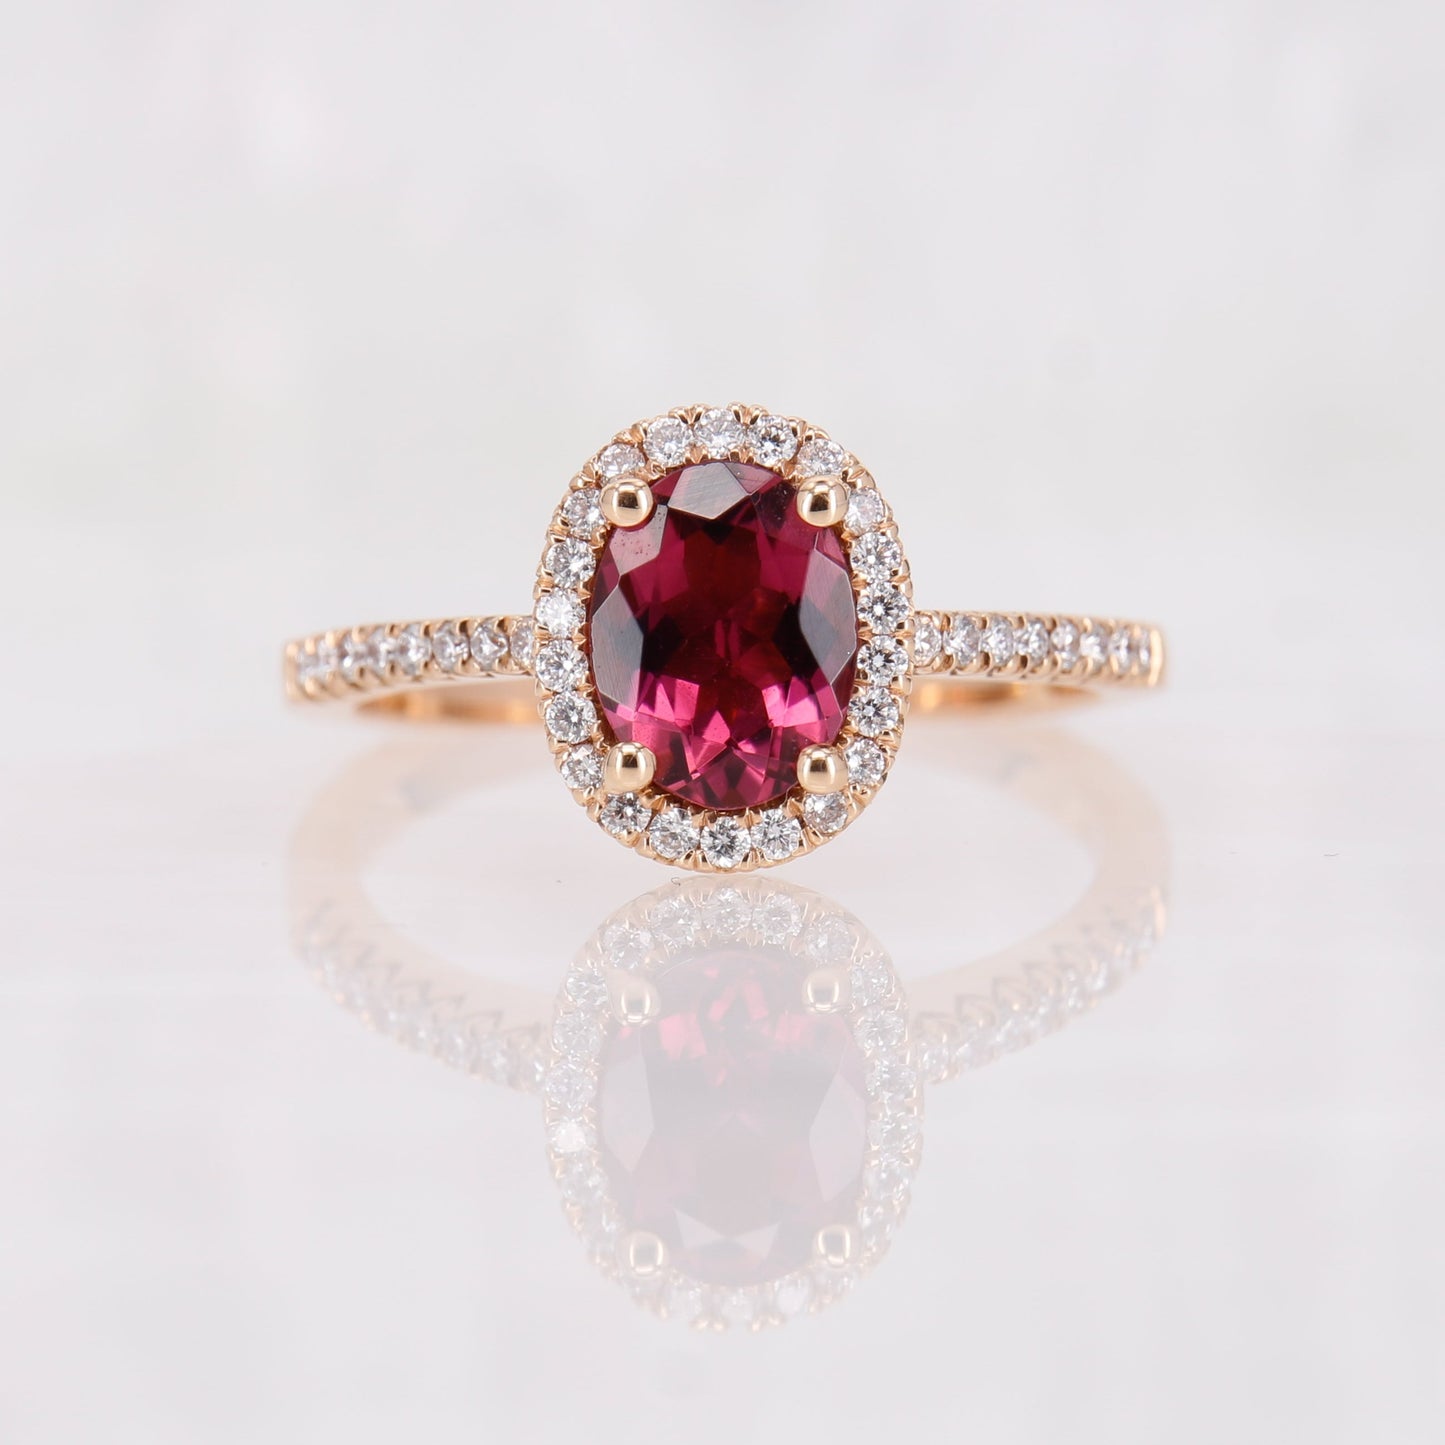 1.07ct Pink Tourmaline Diamond ring. At the centre of the ring is a deep pink oval cut tourmaline. Surrounding the tourmaline is a halo of sparkling diamonds. Adorning the shoulders of the ring are additional diamonds, meticulously set to cascade down the band. Crafted from luxurious 18ct rose gold, the warmed-toned rose gold complements the pink tourmaline and diamonds perfectly.